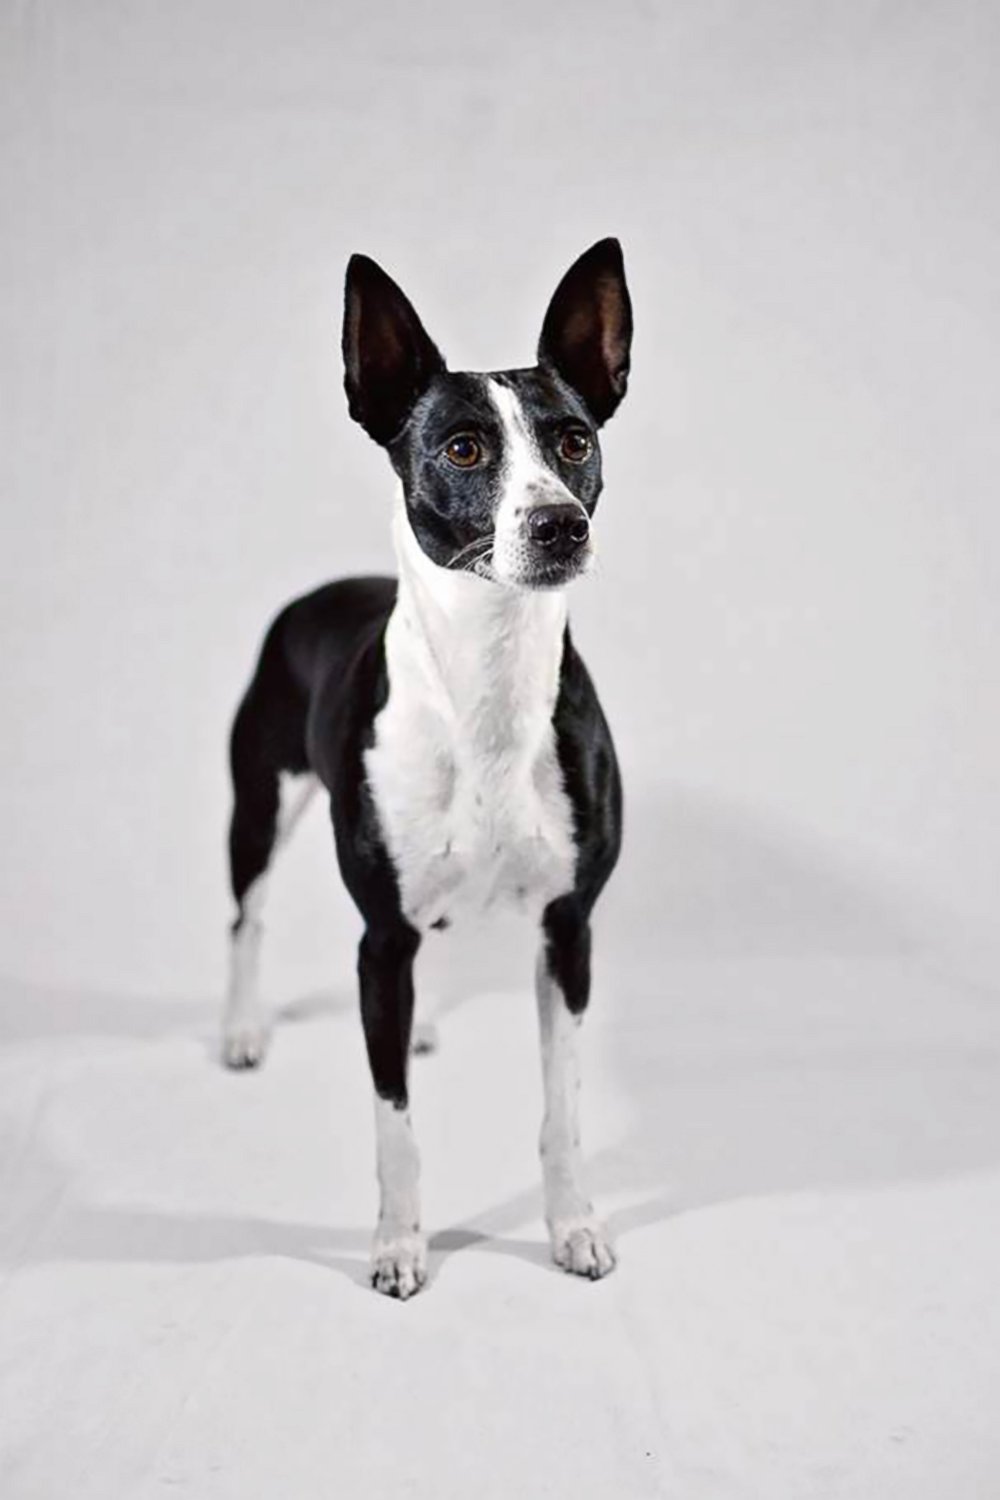 PHOTO: The new Westminster Kennel Club dog show eligible breed the American Hairless Terrier. 
